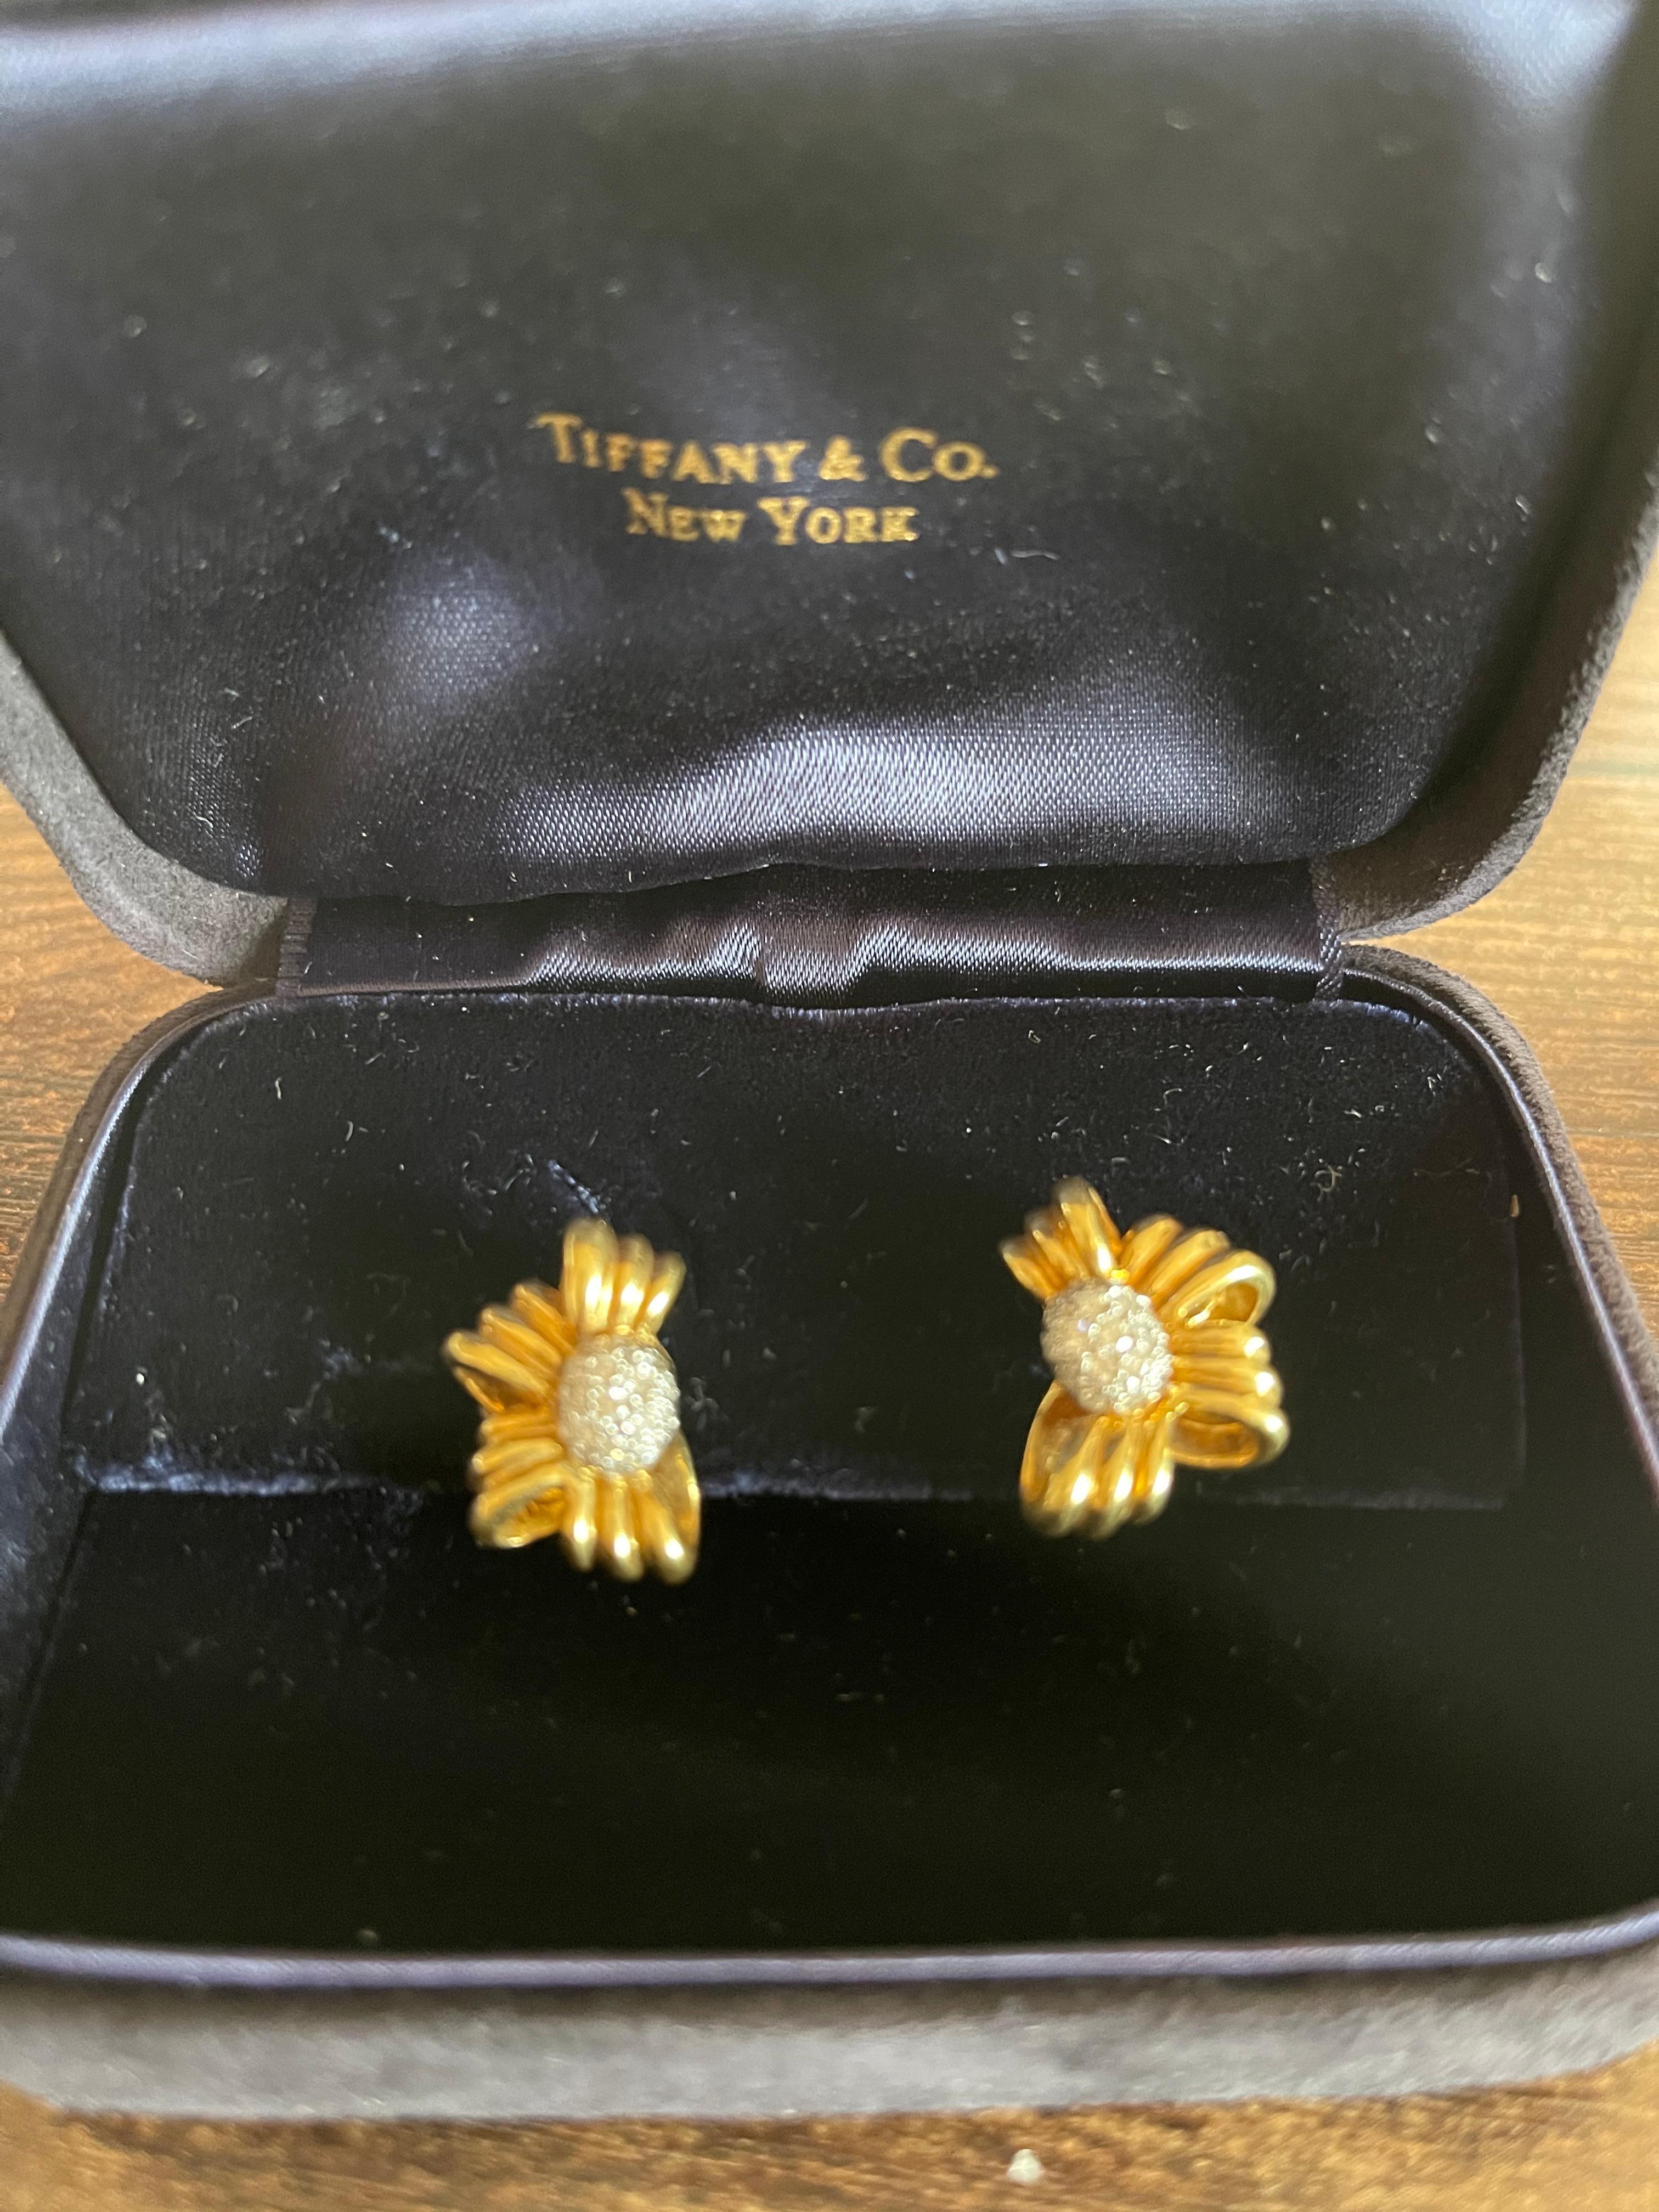 A pretty pair of vintage half bow earrings set with a diamond center by Tiffany & Co. Circa 1980. The center of the earring is pave set with 36 round brilliant diamonds weighing approximately 0.40 carats total. The earrings sit nicely on the ear,